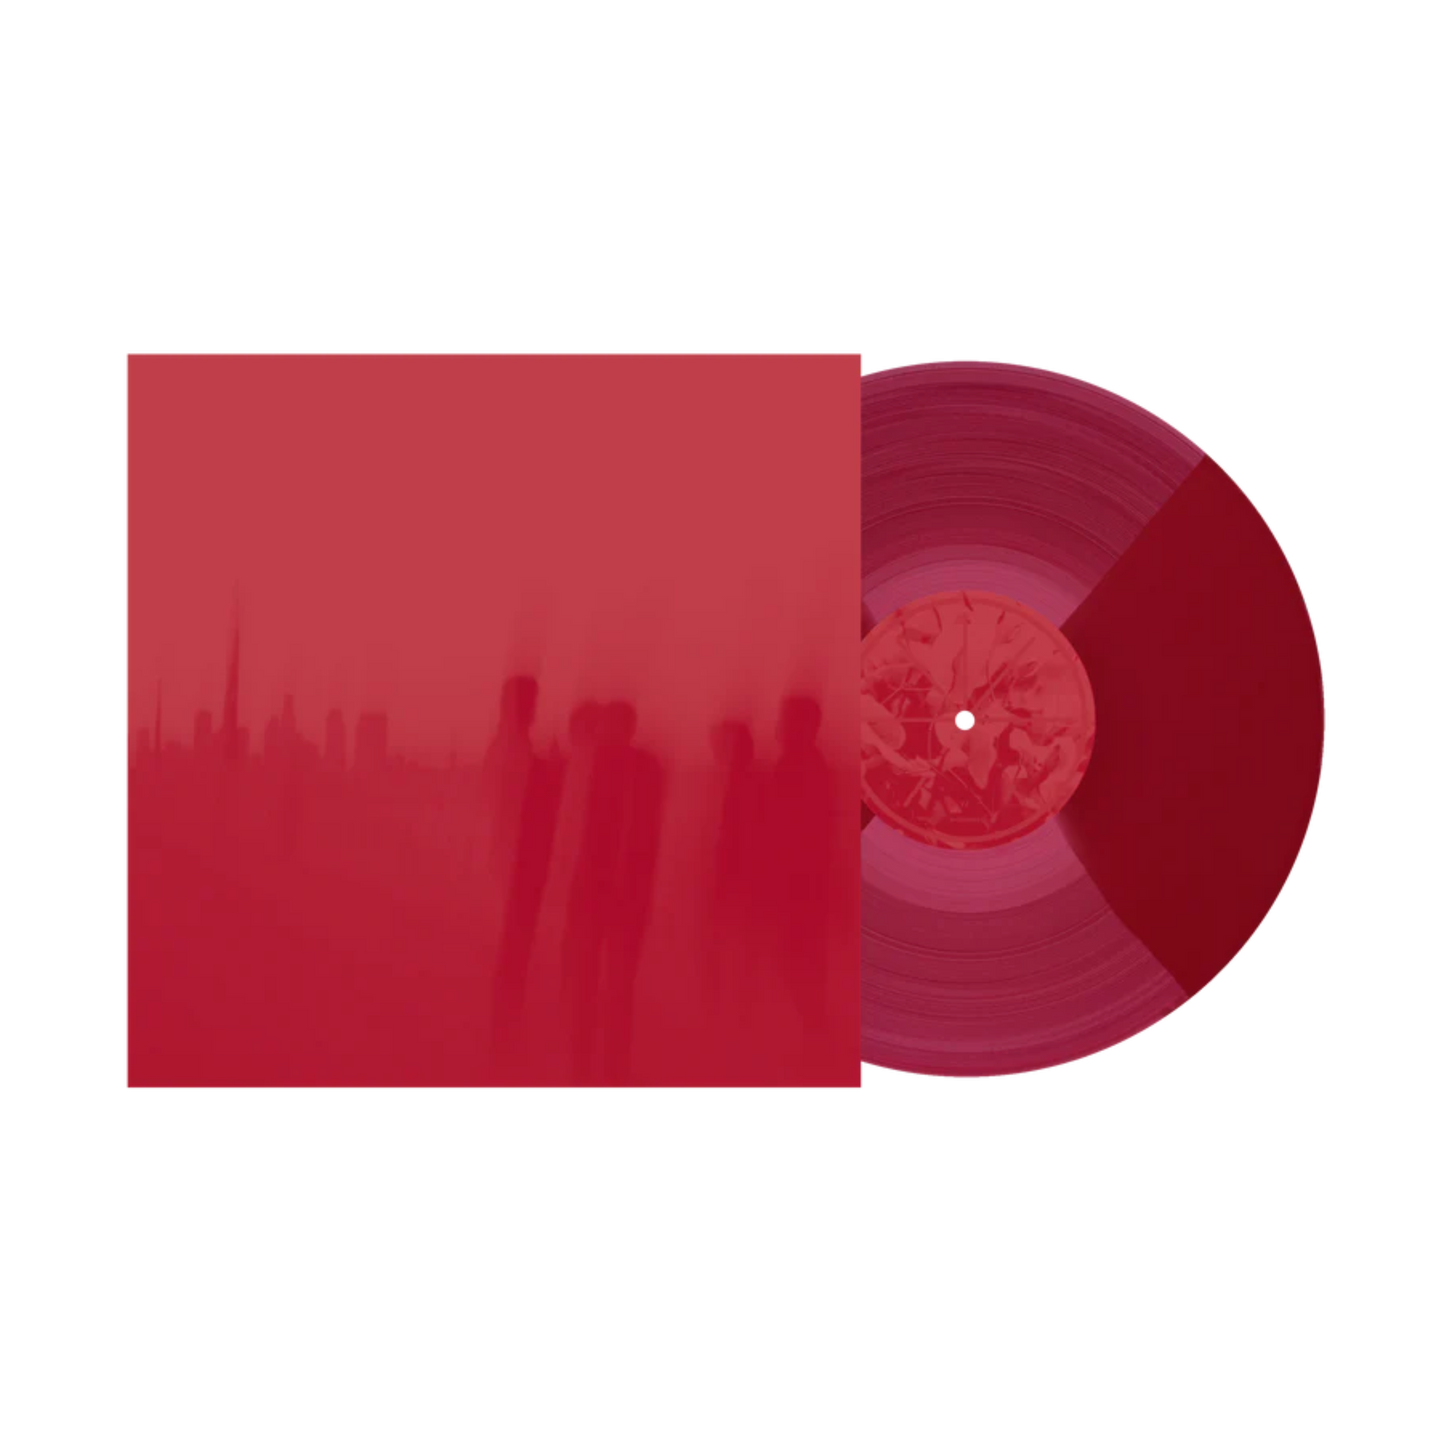 Touché Amoré "Is Survived By" (Remixed / Remastered) LP